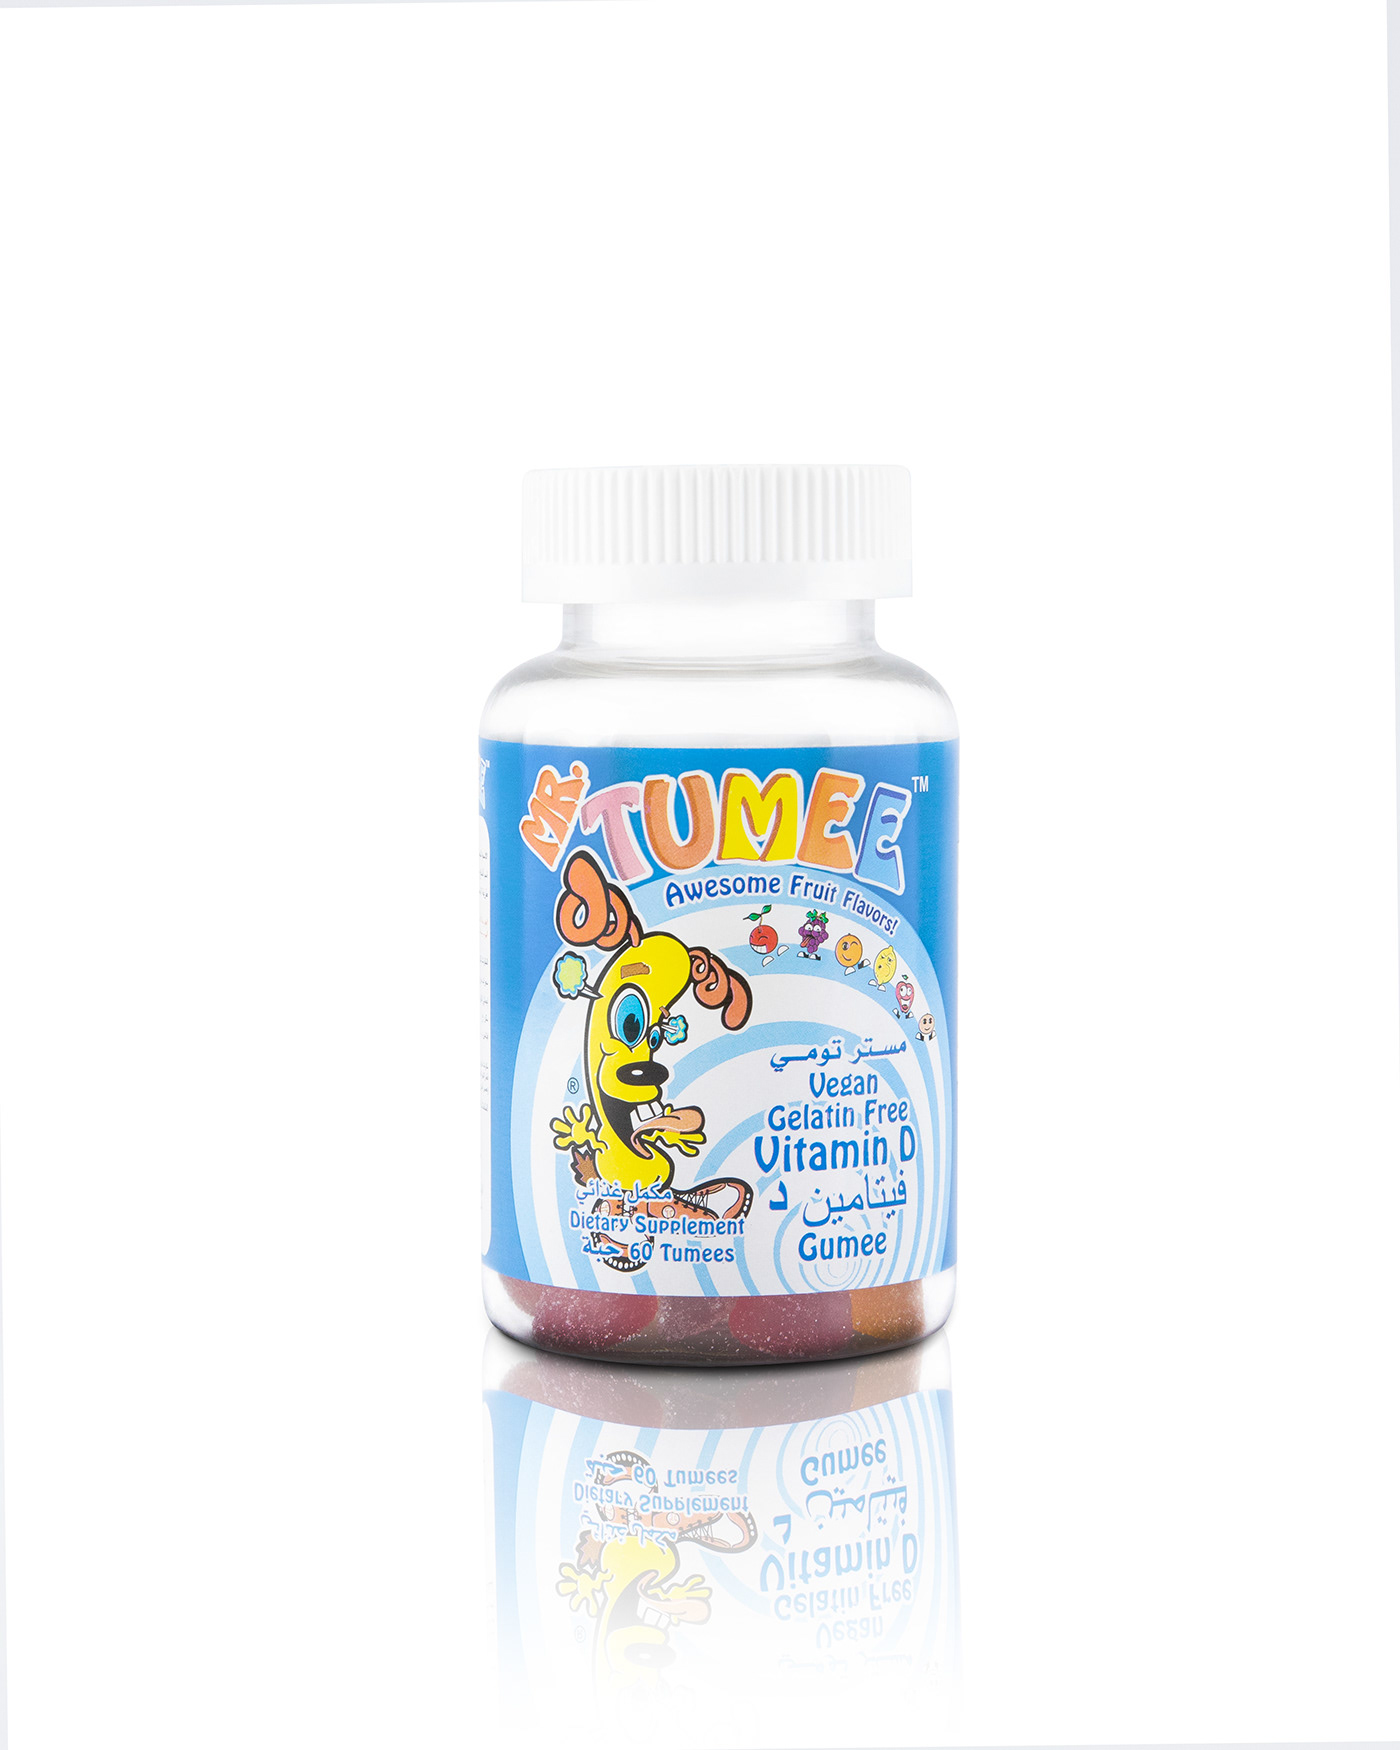 bottles gumee mr.tumee product_photography products vitamin